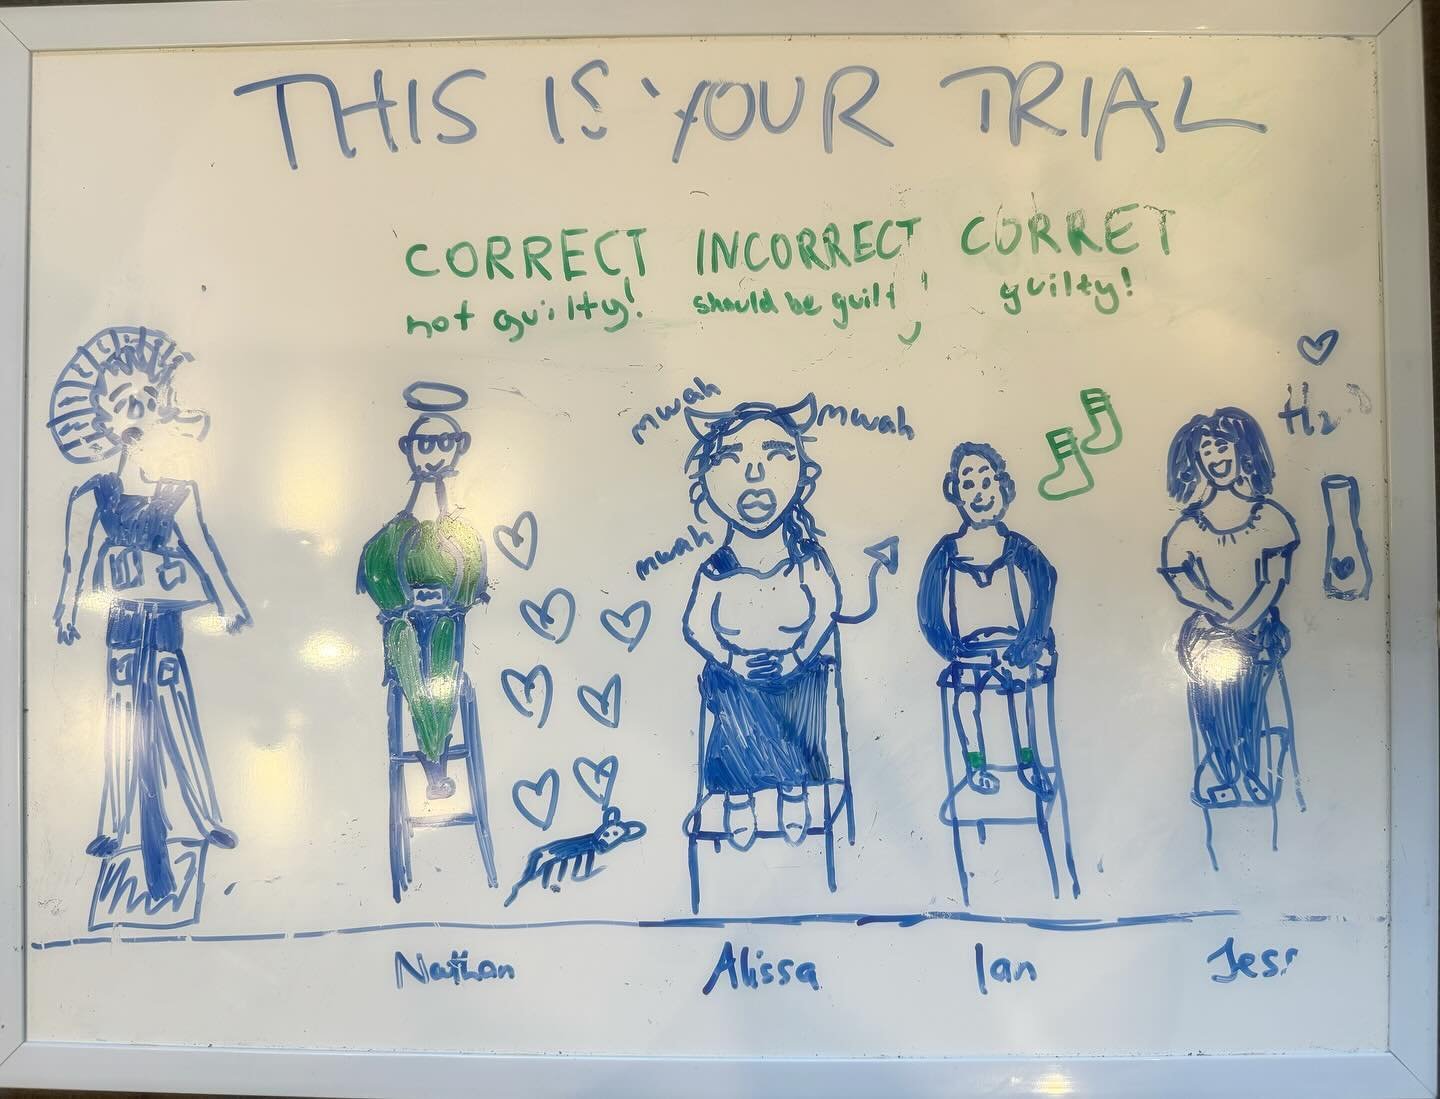 Look at this awesome courtroom art from our first show at @hiphopsbrewers! From left to right:
*The Judge
*Nathan, not guilty of being a &ldquo;last minute man&rdquo;
*Alissa, not guilty of kissing her daughter too much
*Ian, guilty of failing to pai